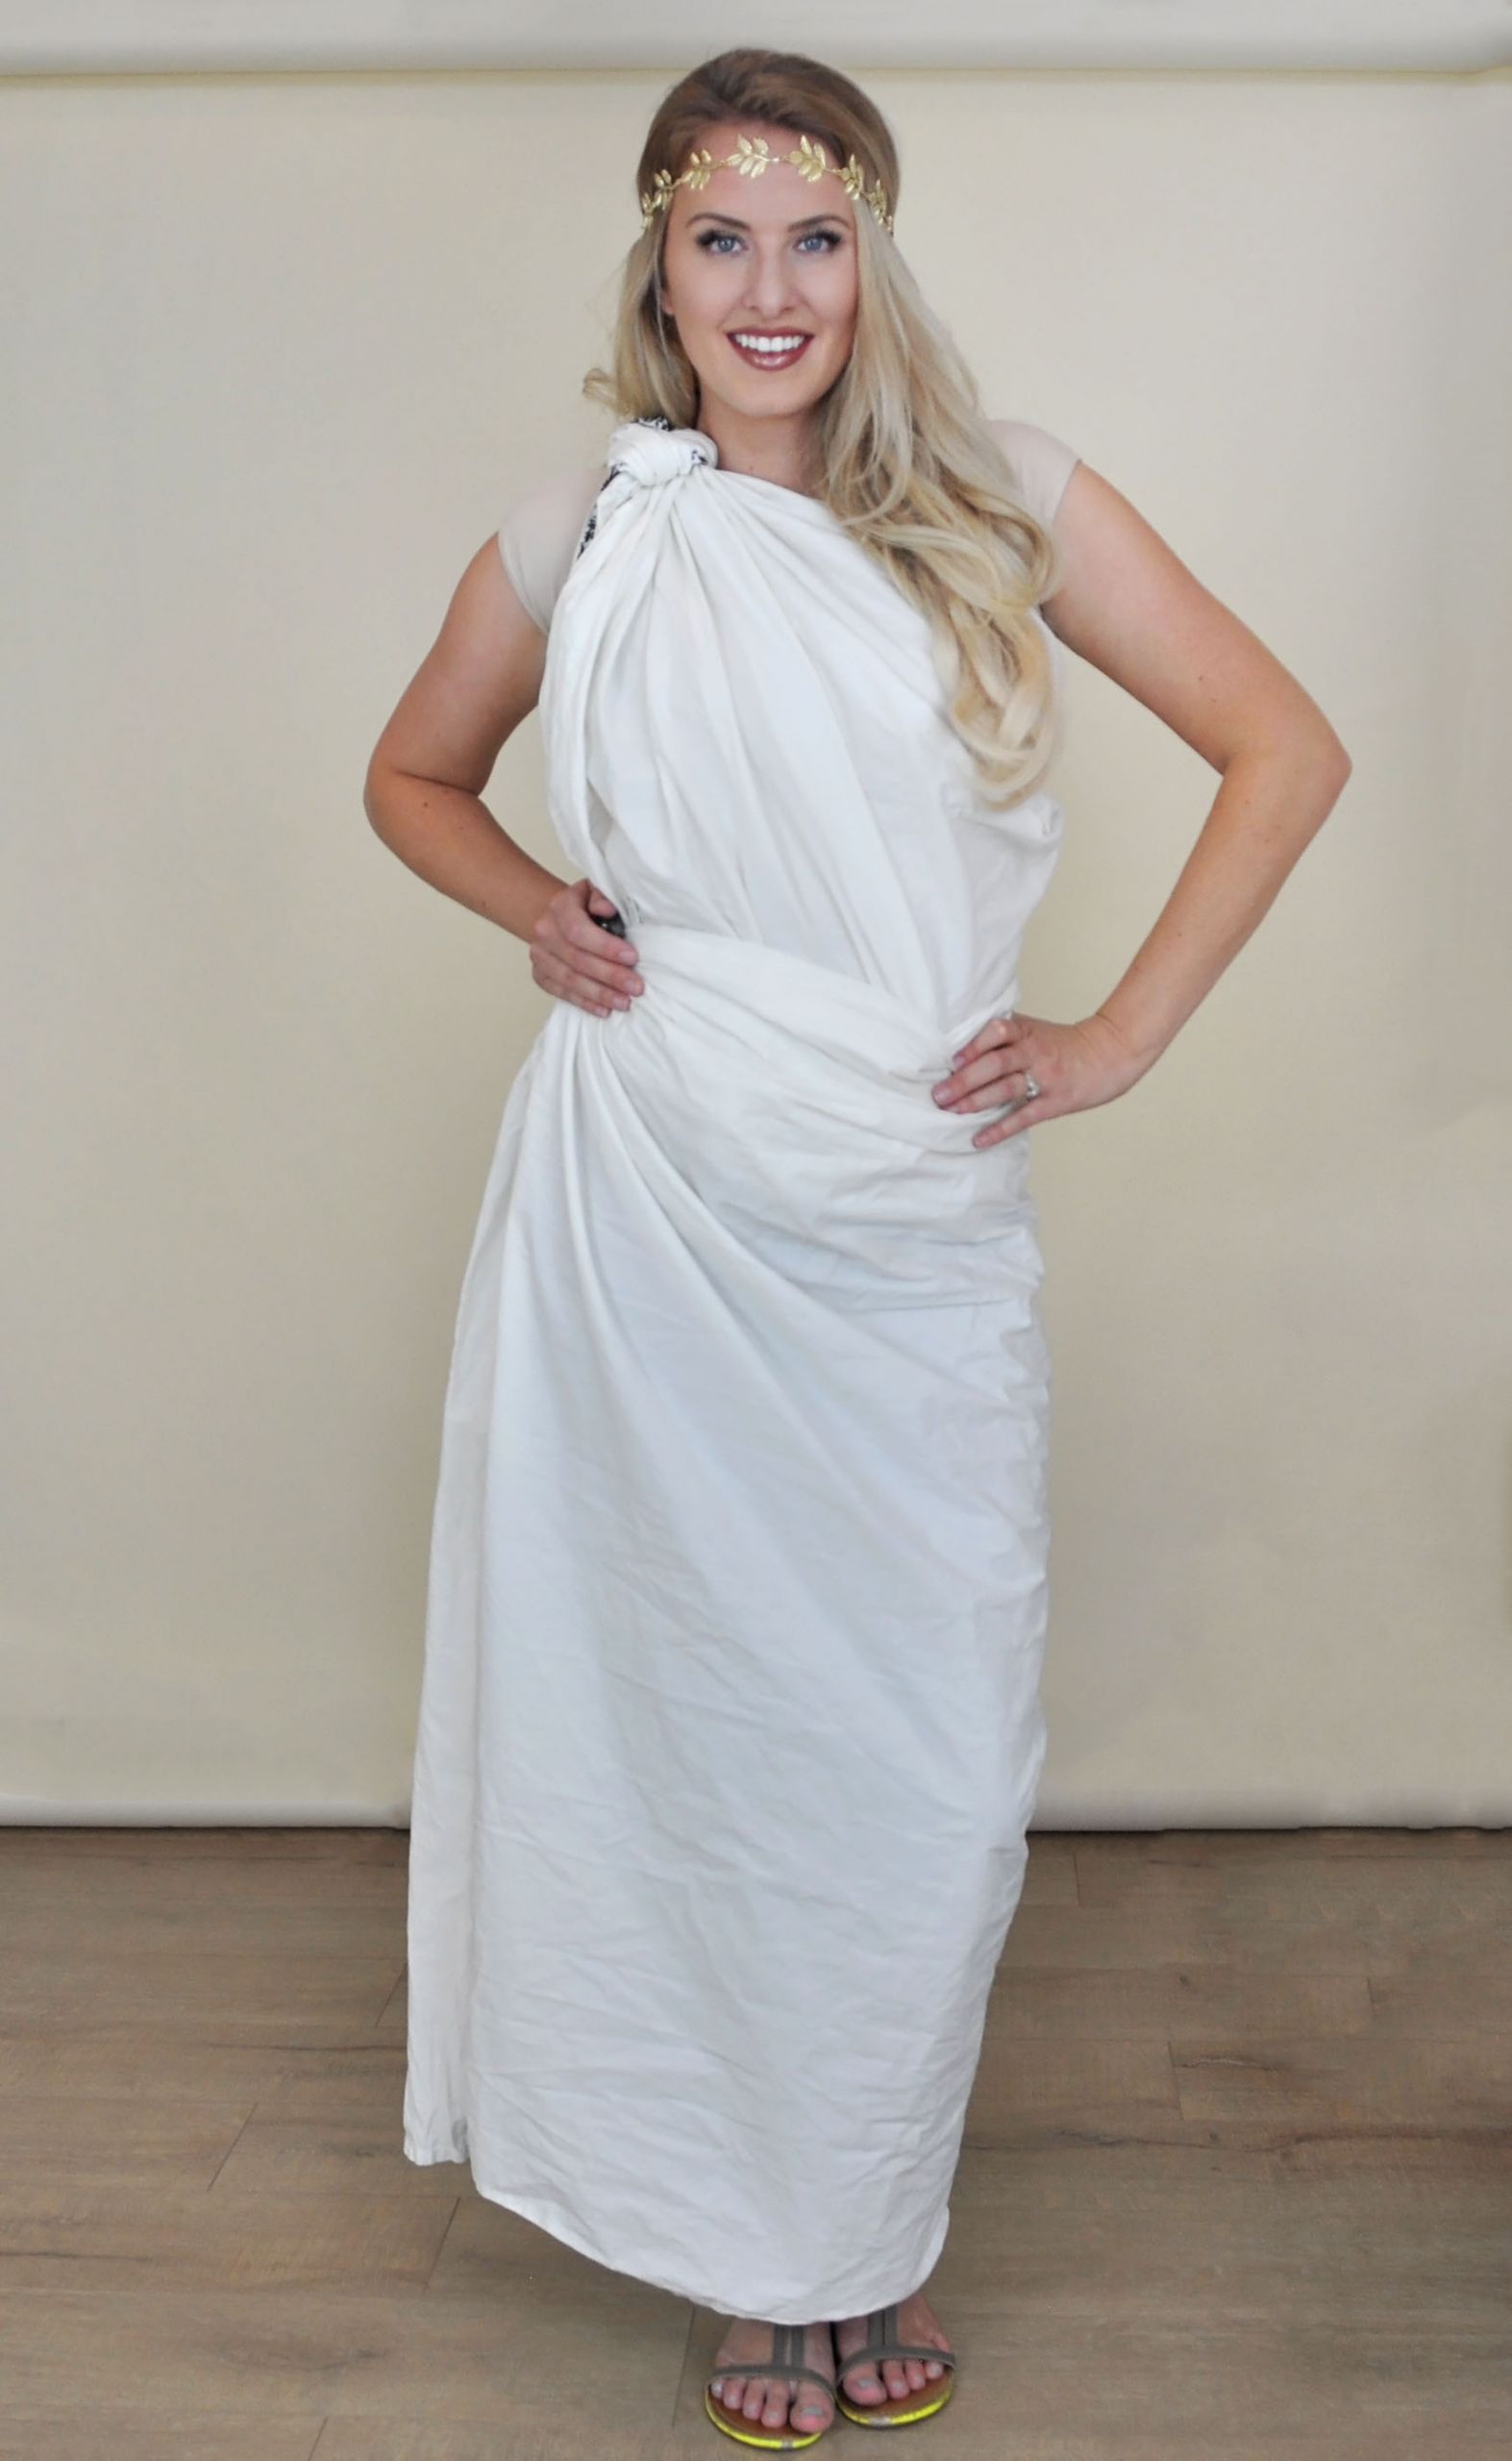 DIY Toga Costumes
 5 Creative Sheet Costumes–without damaging the sheets